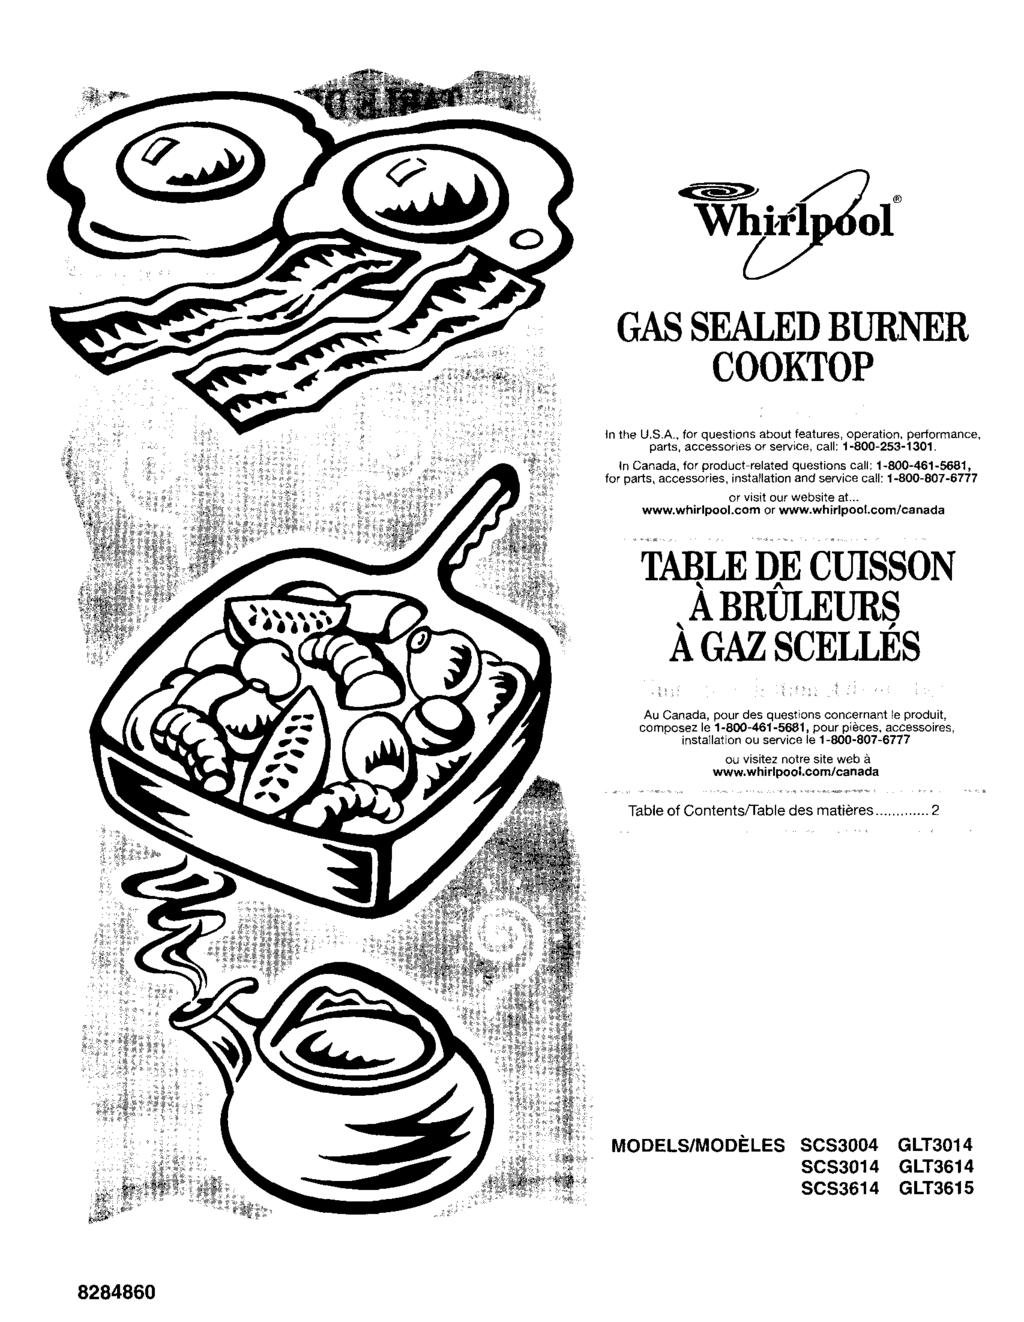 GASSEALEDBURNER COOKTOP In the U.S.A., for questions about features, operation, per[ormance, parts, accessories or serv{ce, call: 1-800-253-1301.